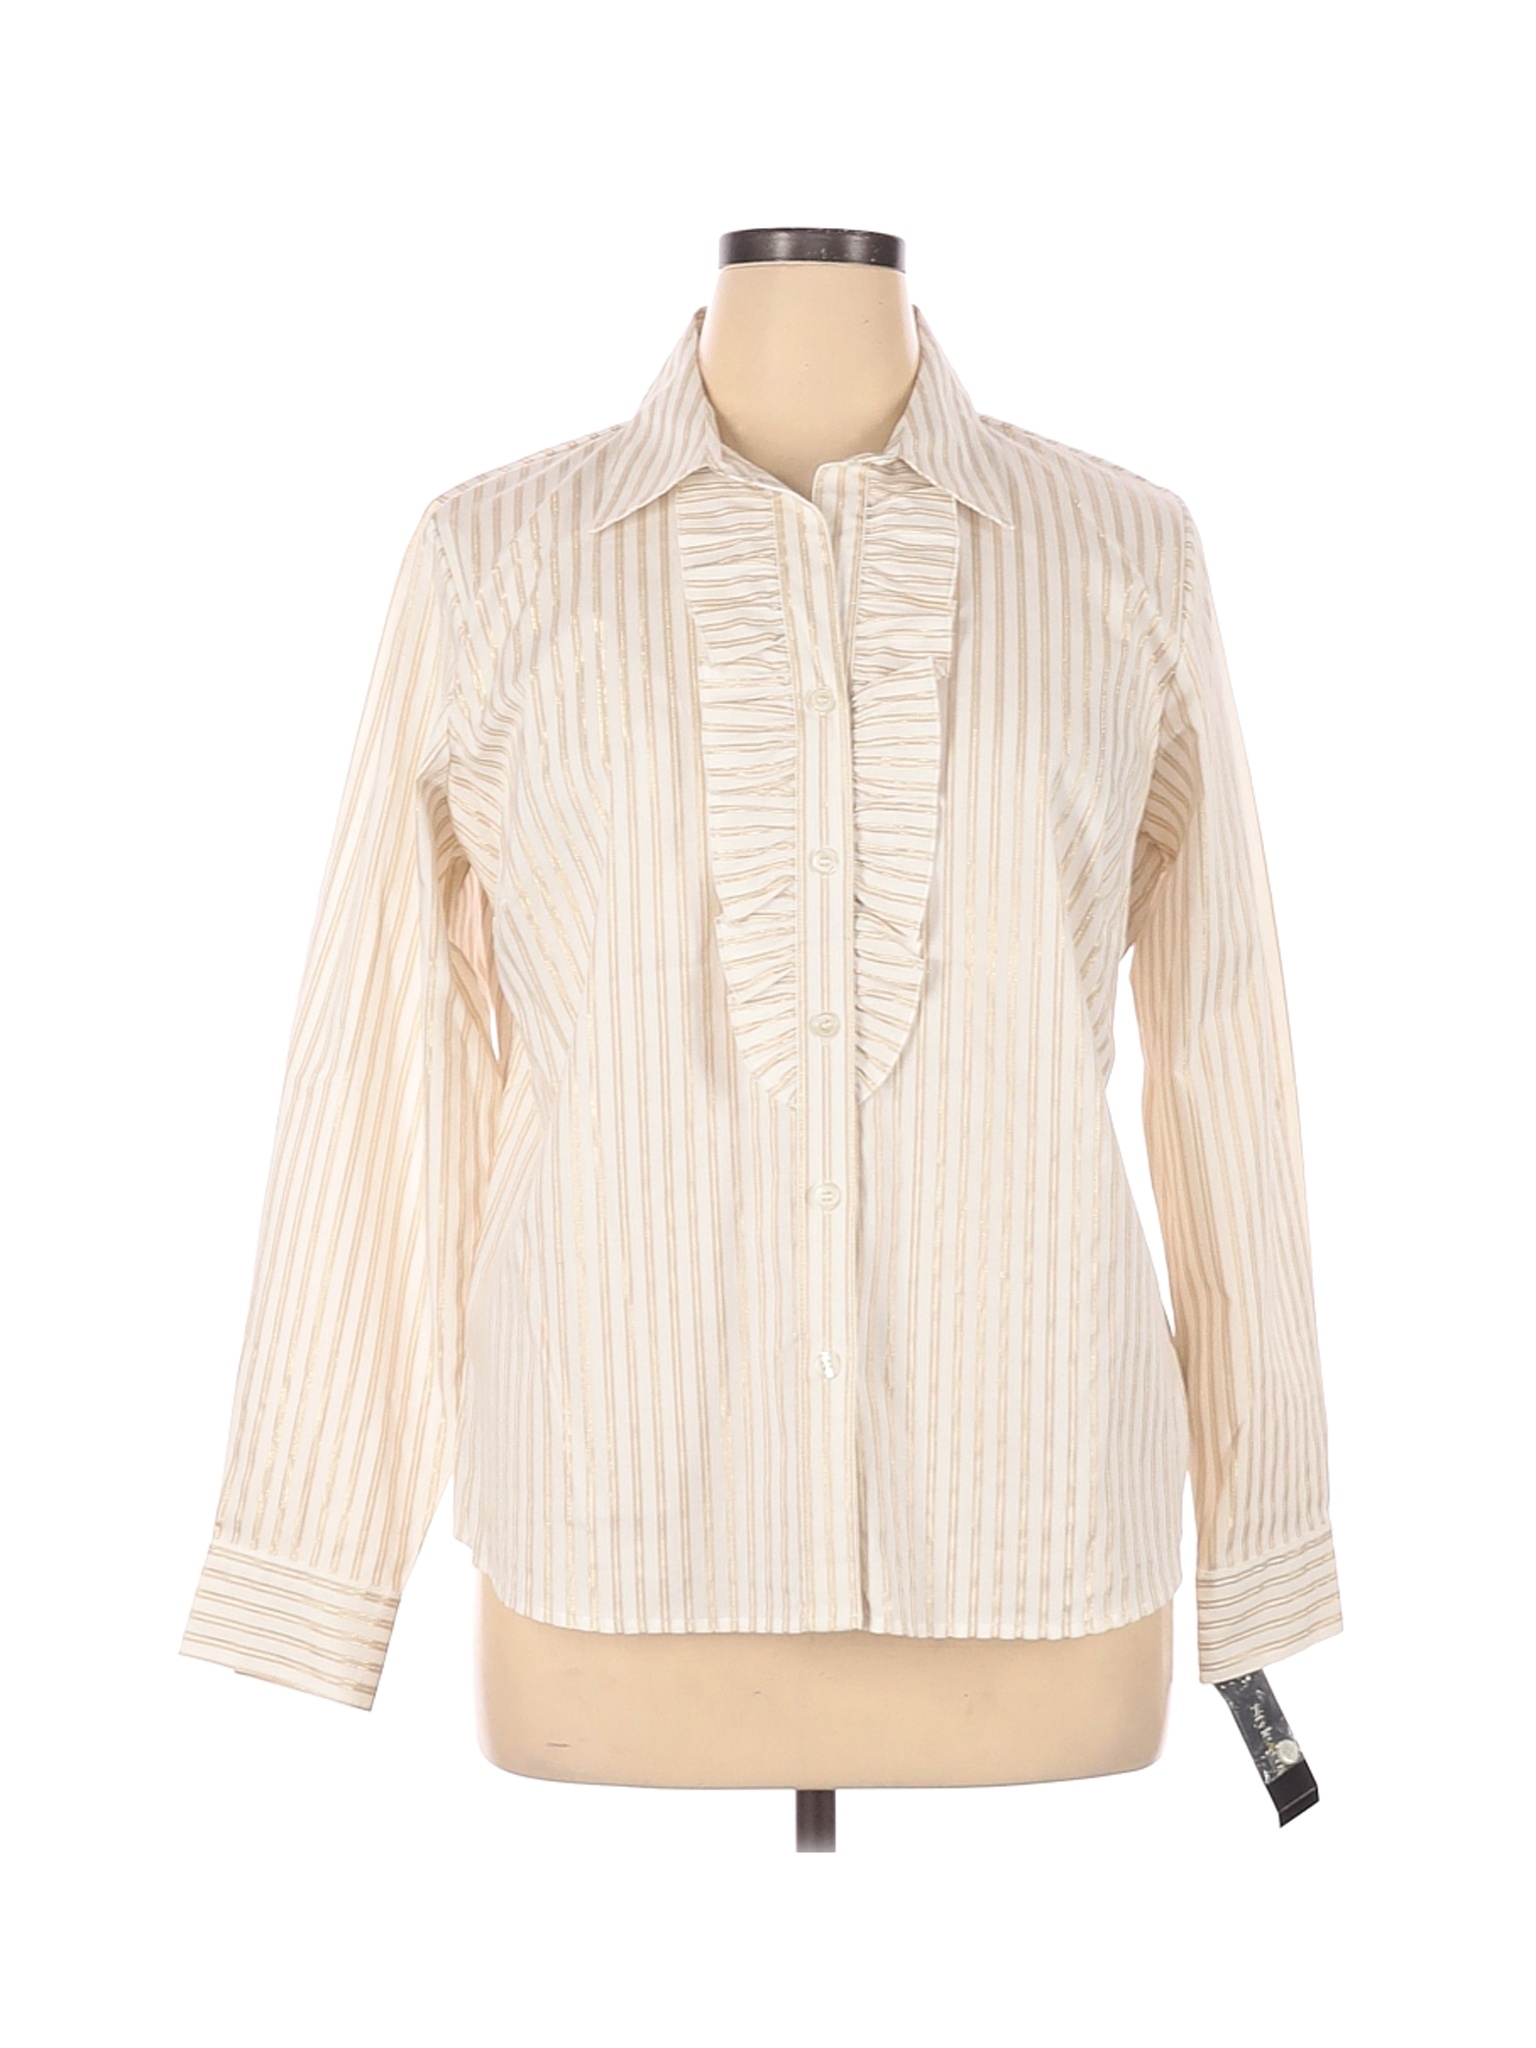 NWT Style&Co Women Ivory Long Sleeve Button-Down Shirt 16 | eBay